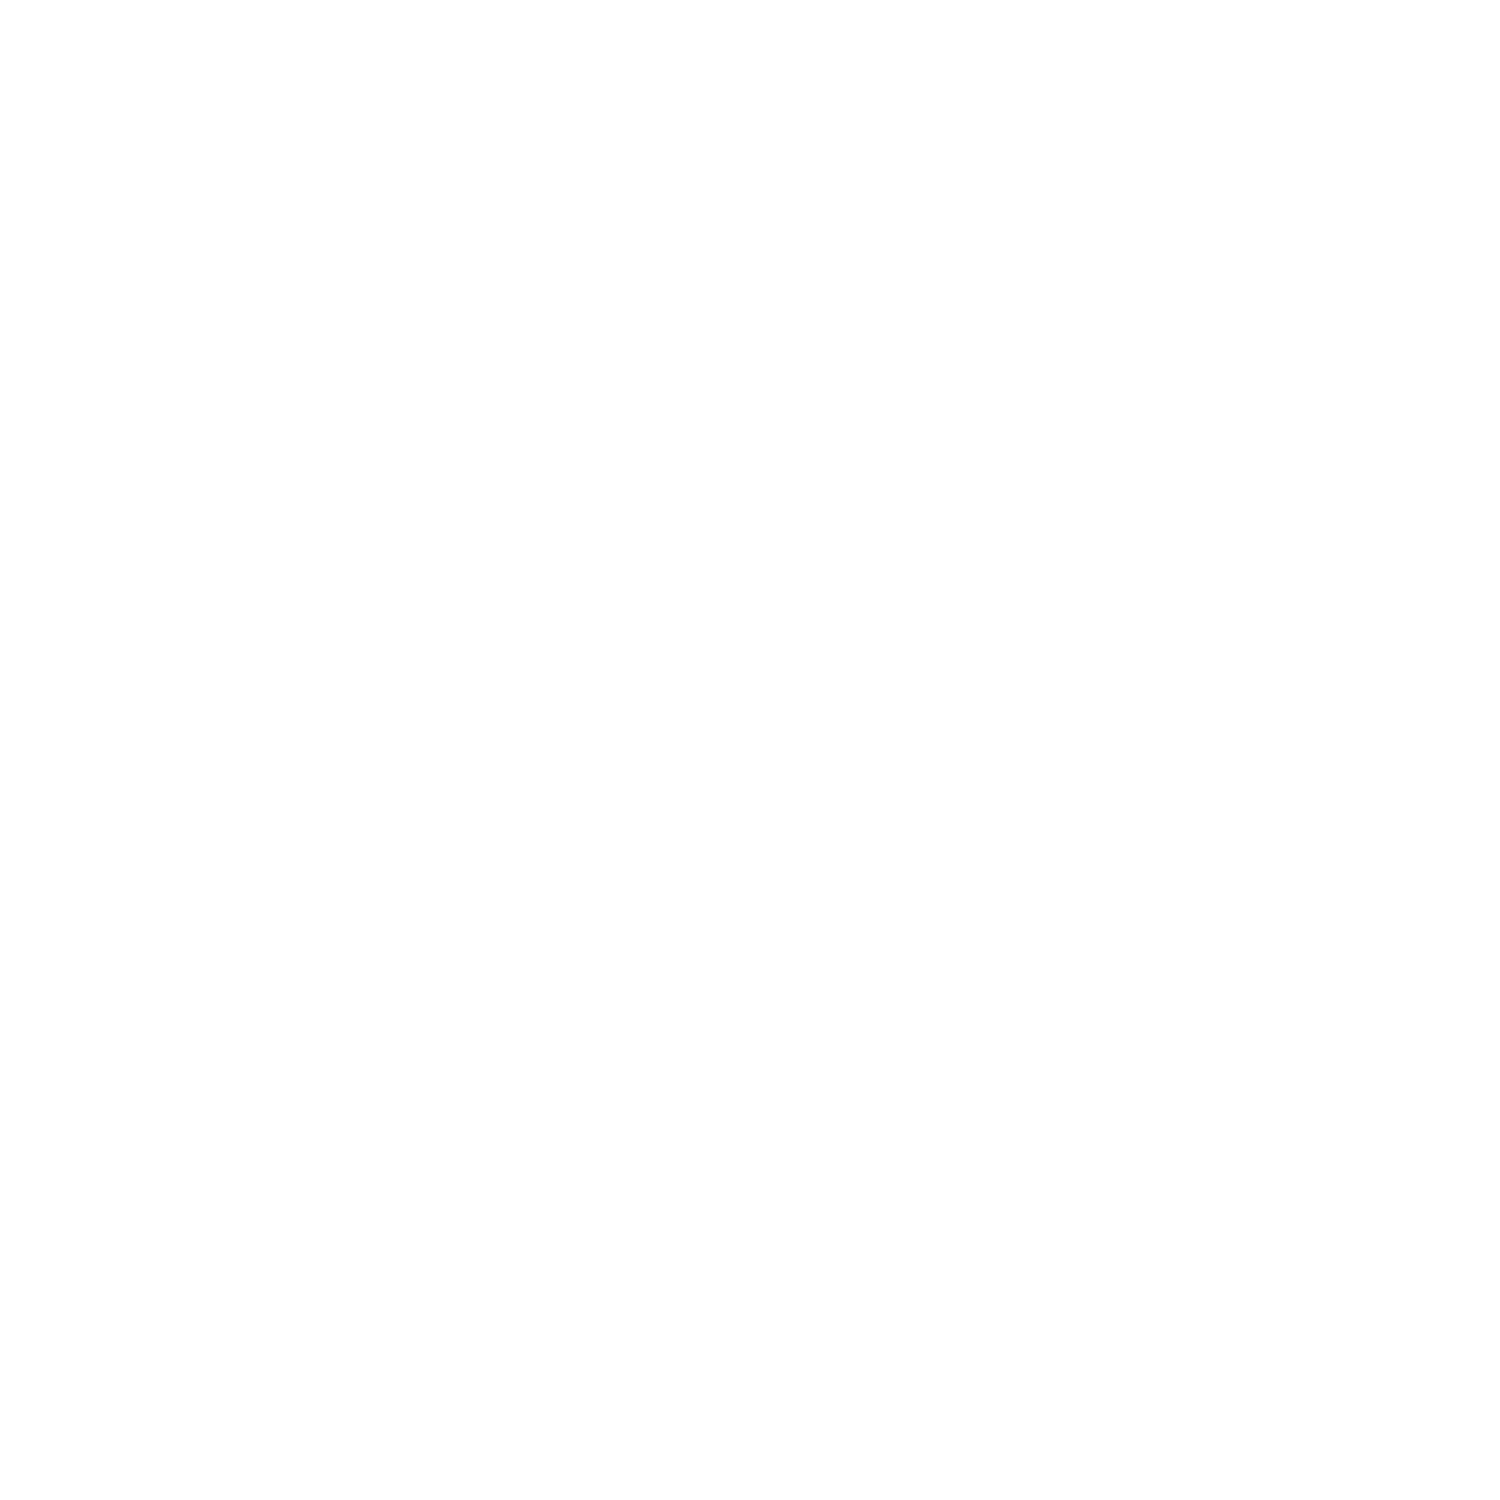 Naturally Dyed Goods